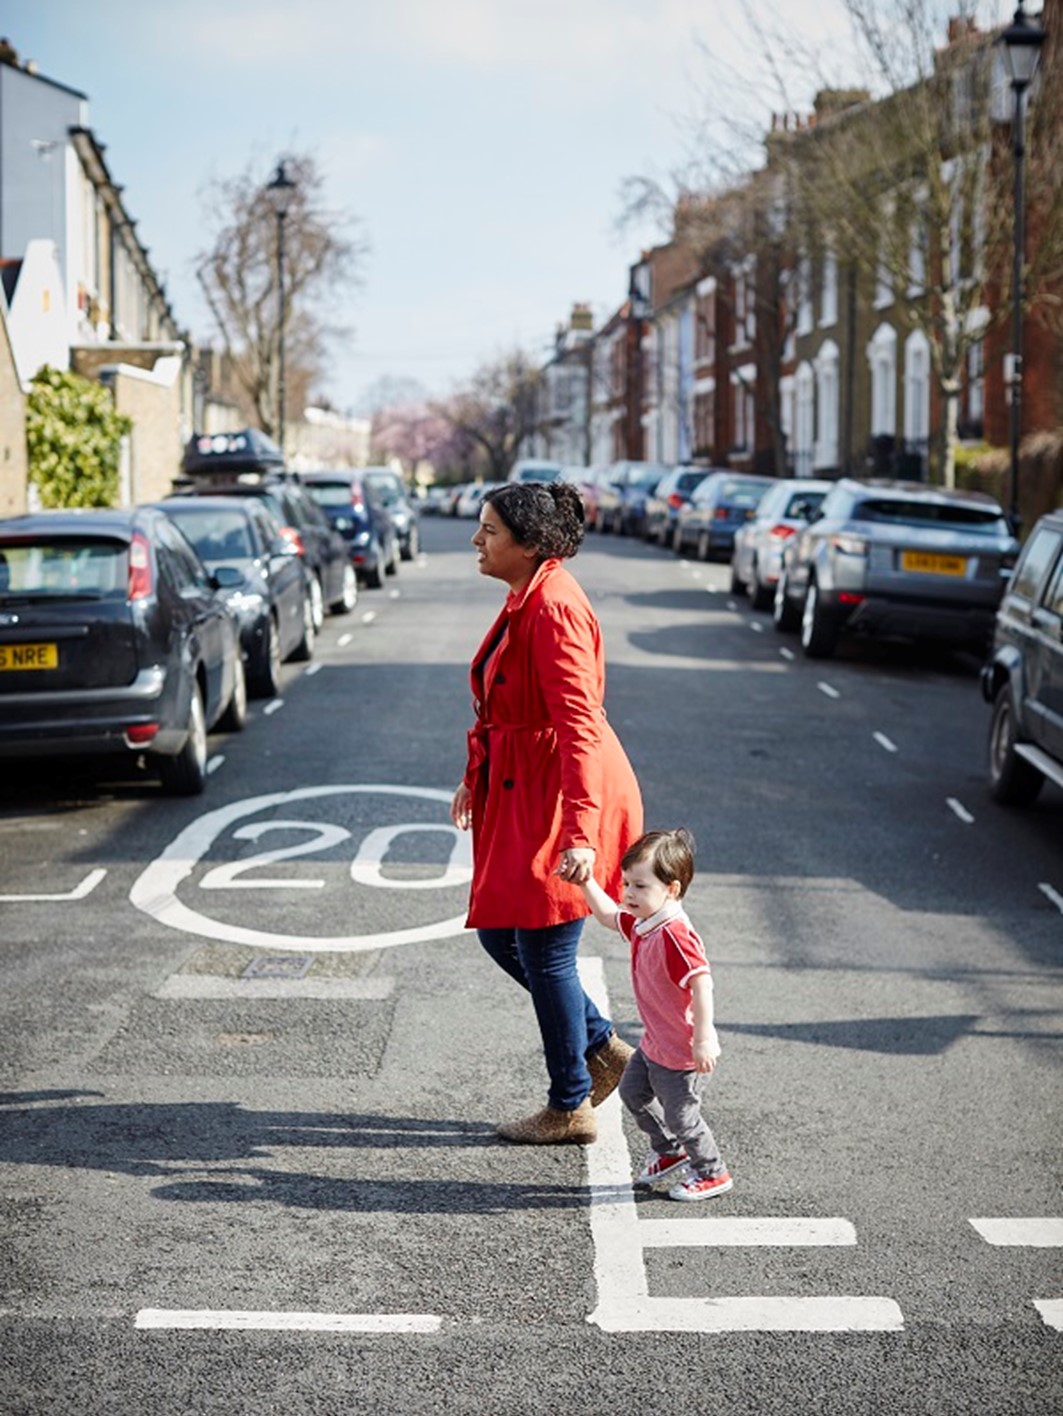 A woman and a small boy crossing the road in a 20mph area